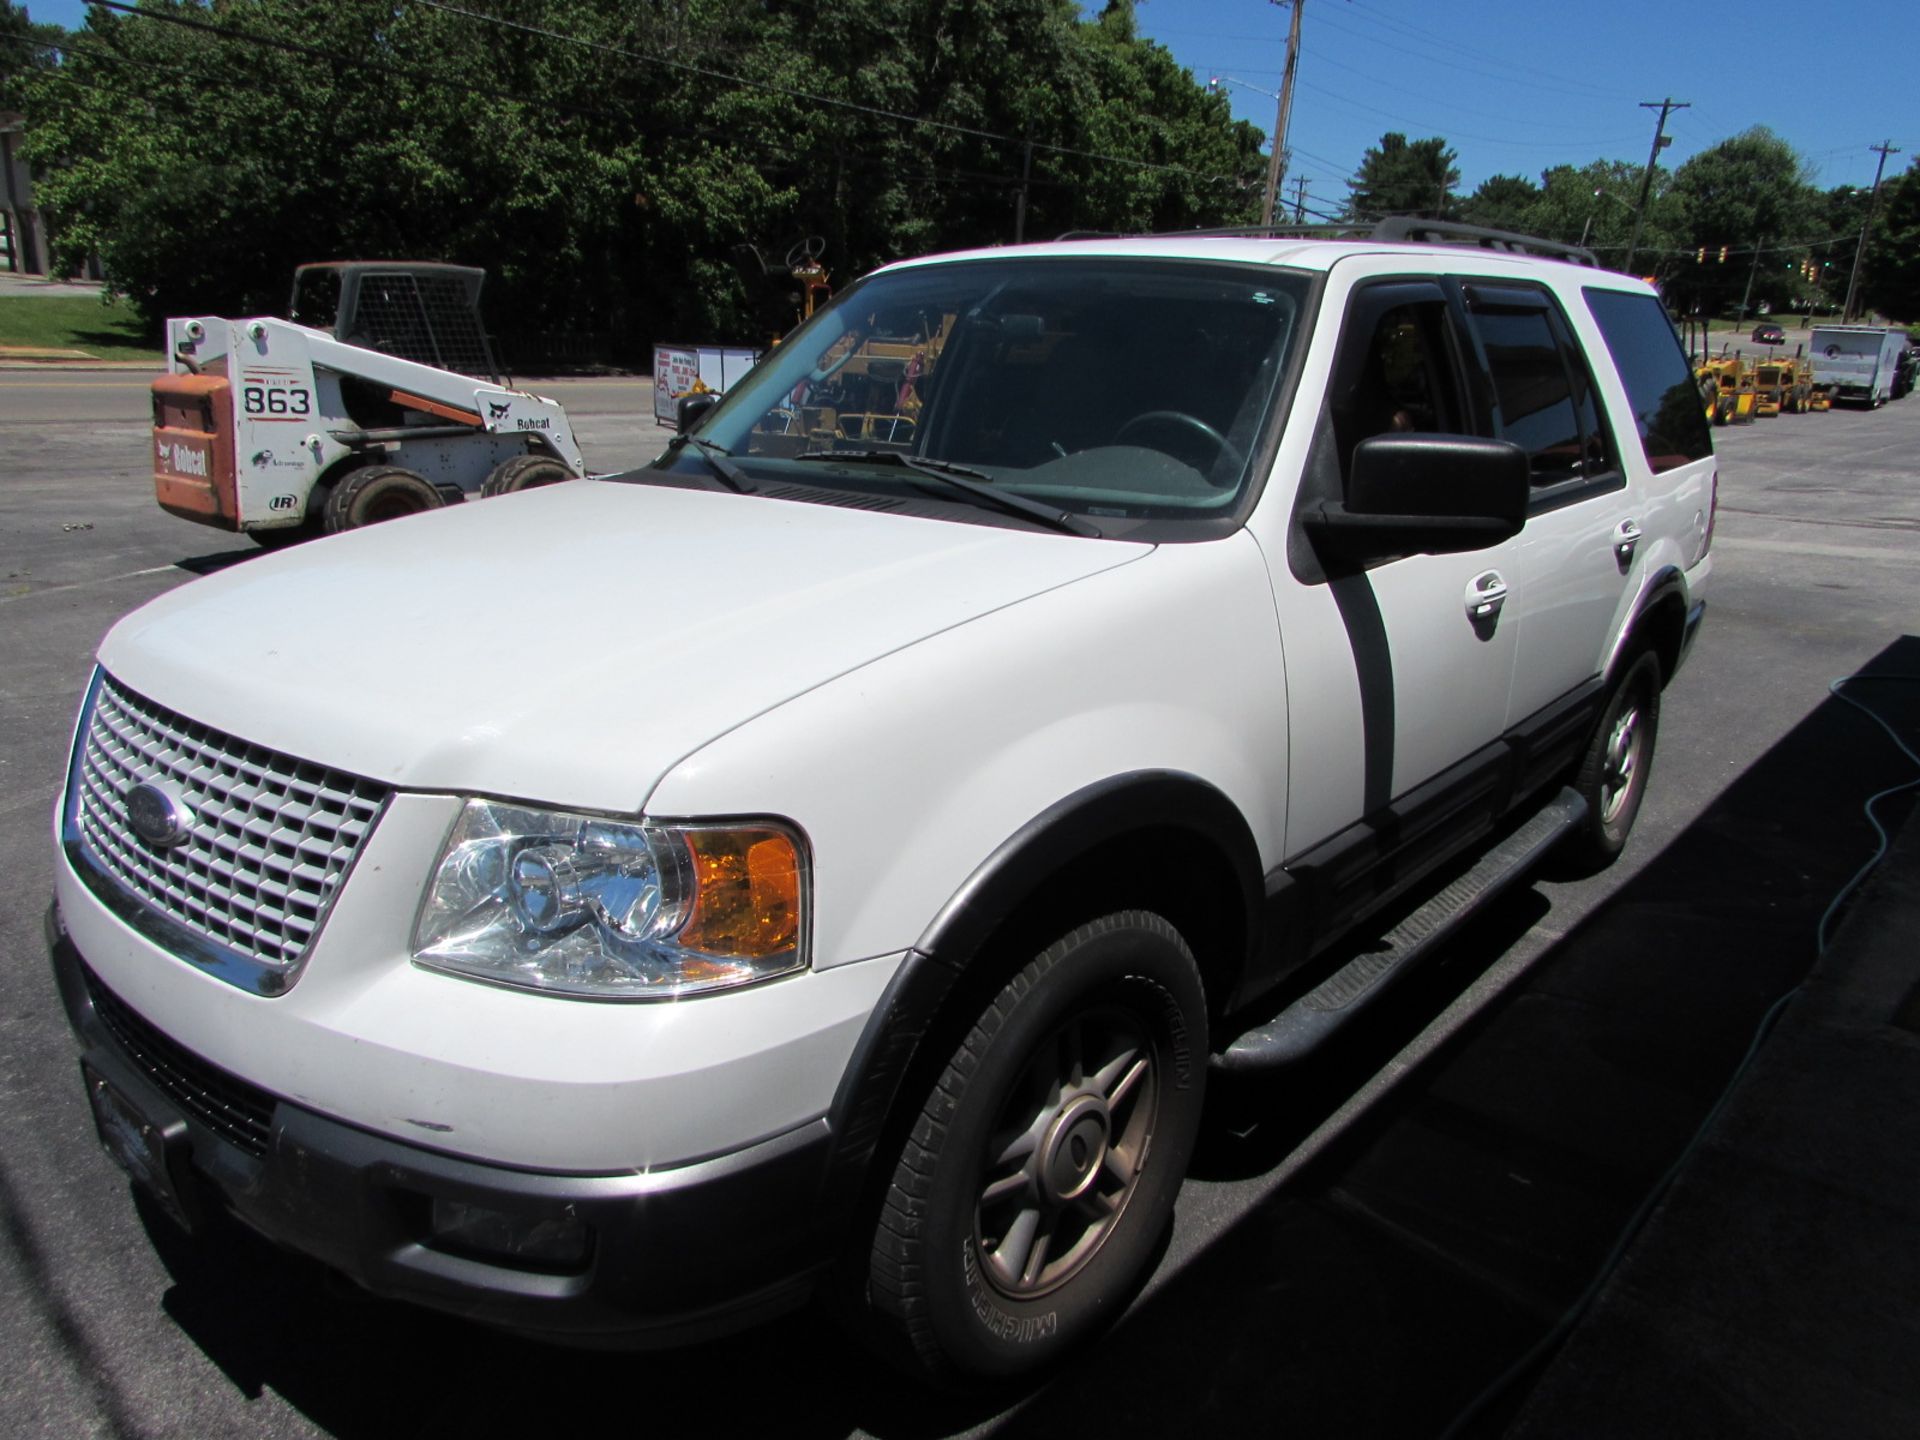 2006 Ford Expedition, V-8 Automatic, Leather, Power Windows, Power Door, 2-WD ODO 70,341, Vin